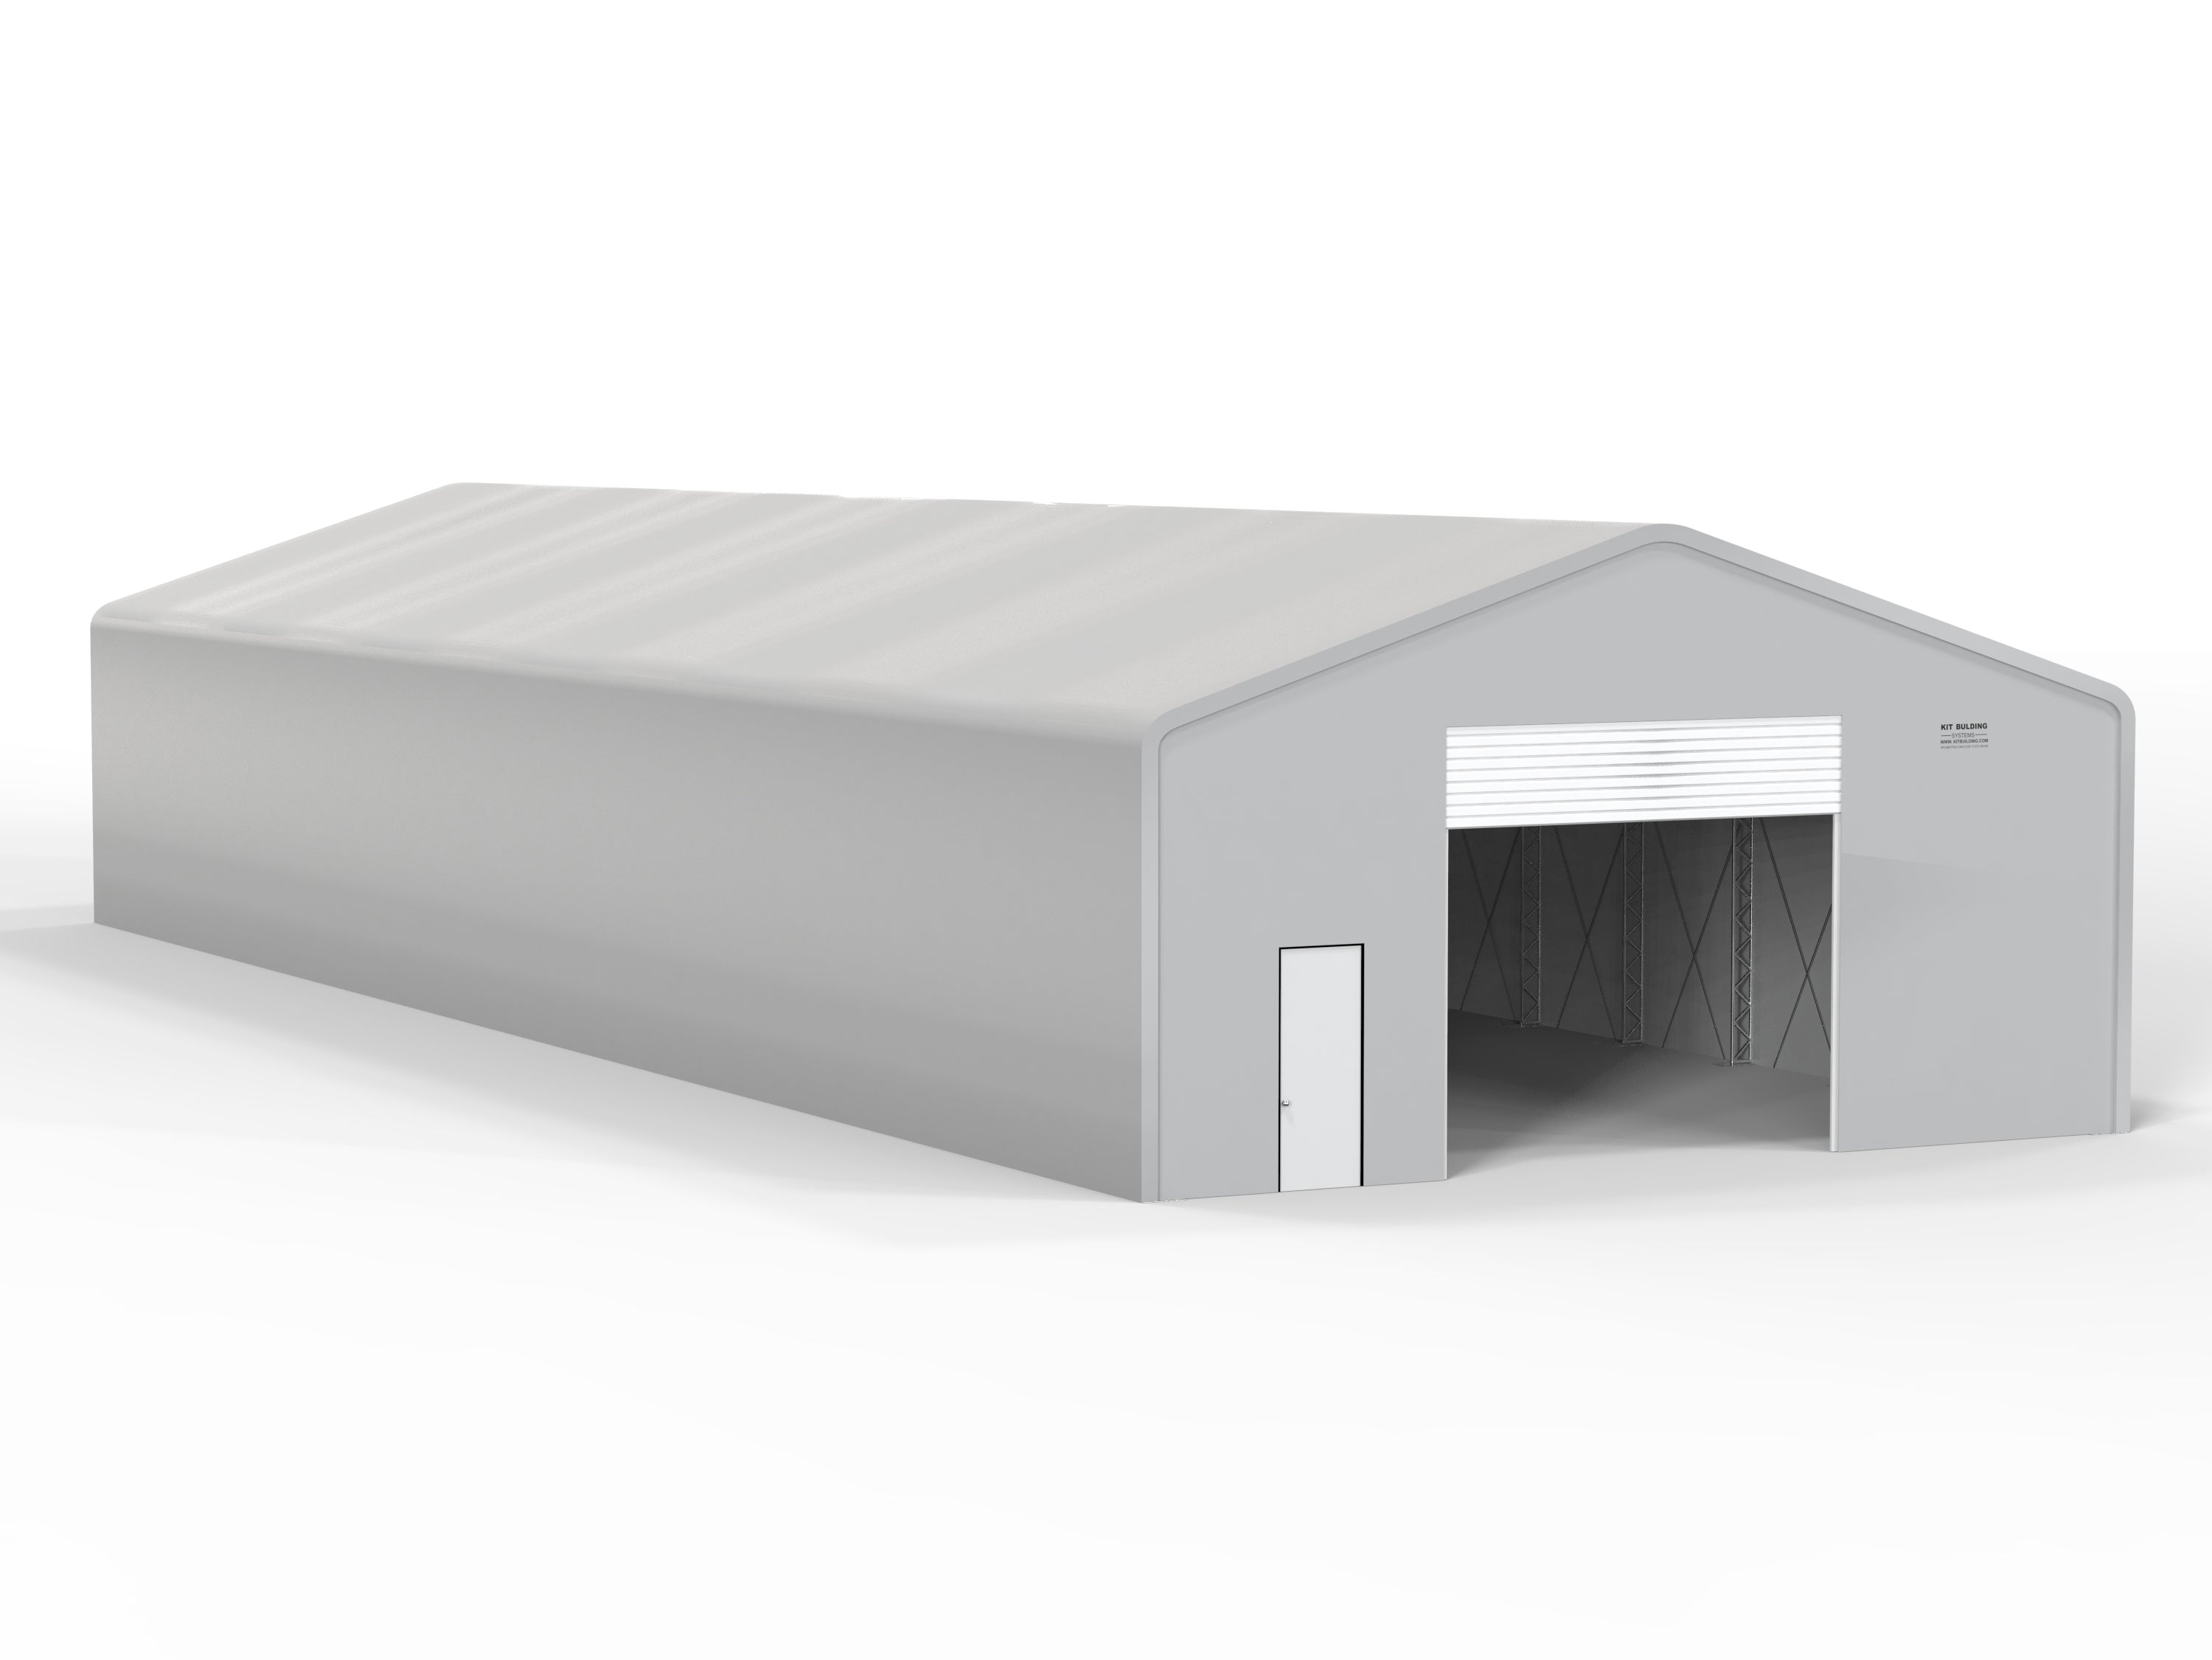 Double Truss PVC temporary storage building - Grey - Automatic RollerShutter